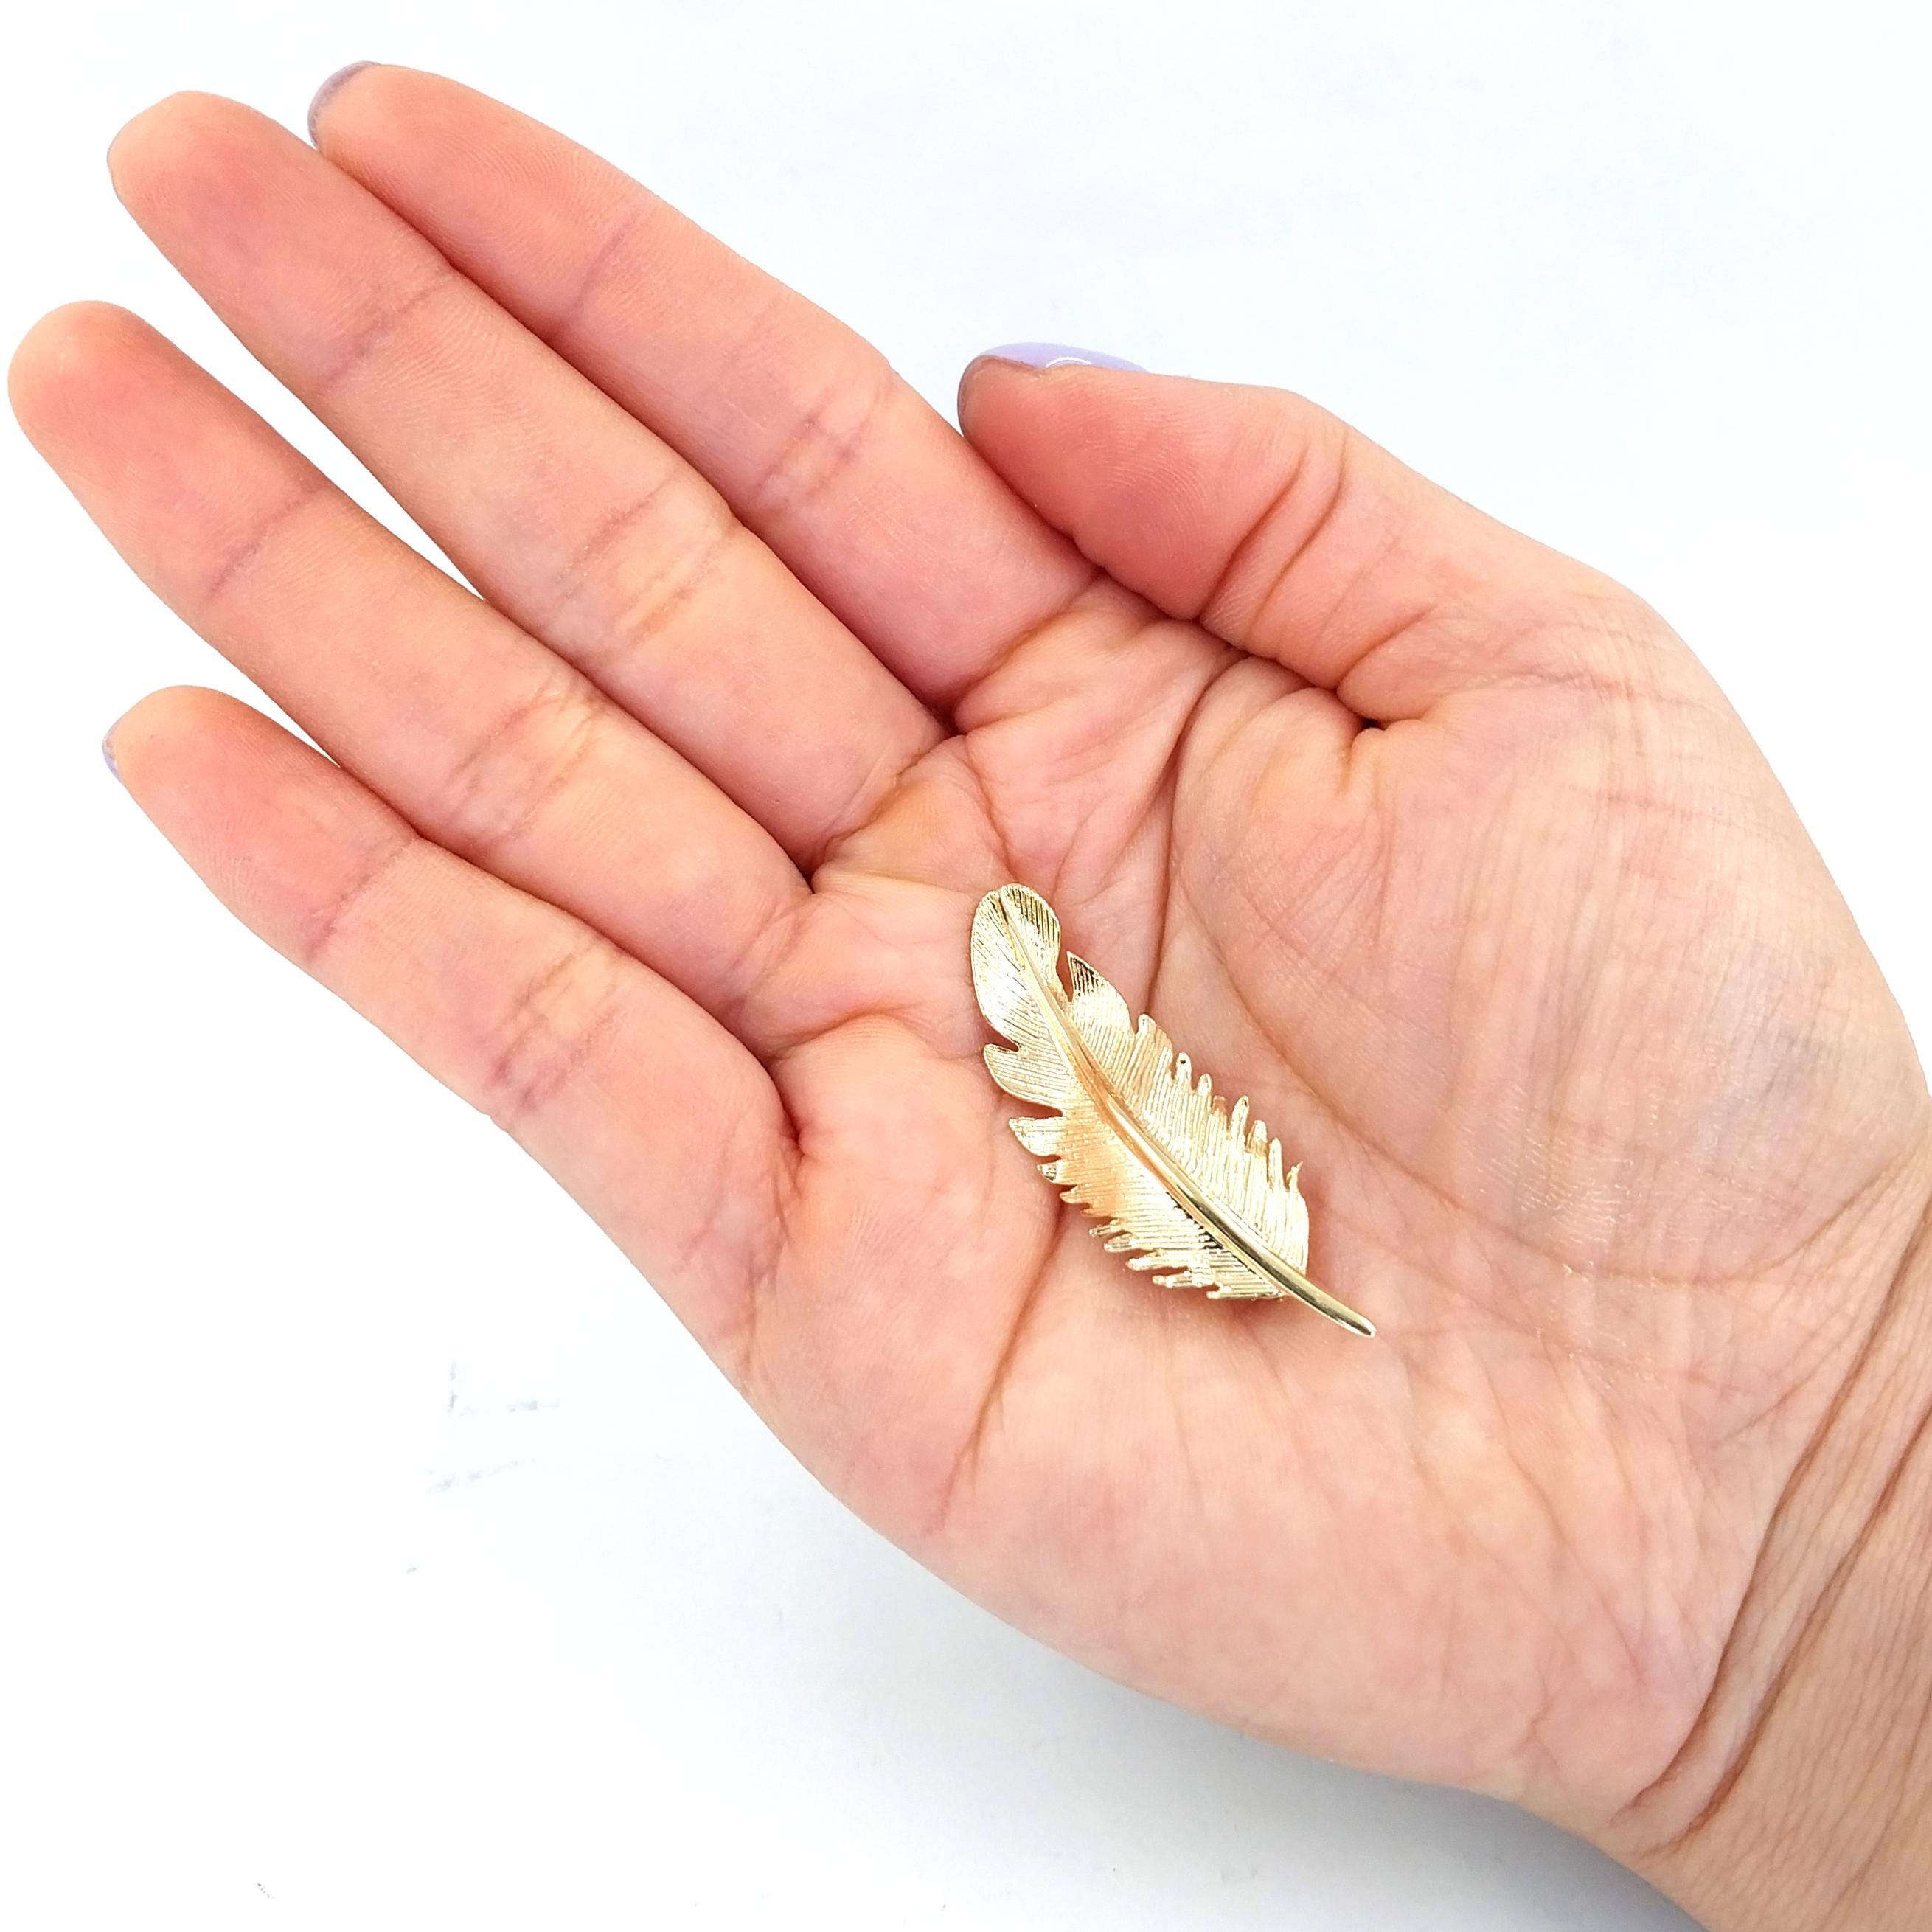 14 Karat Yellow Gold Feather Pin Featuring Textured Design. 1.75 Inches Long. Finished Weight is 3.6 Grams.